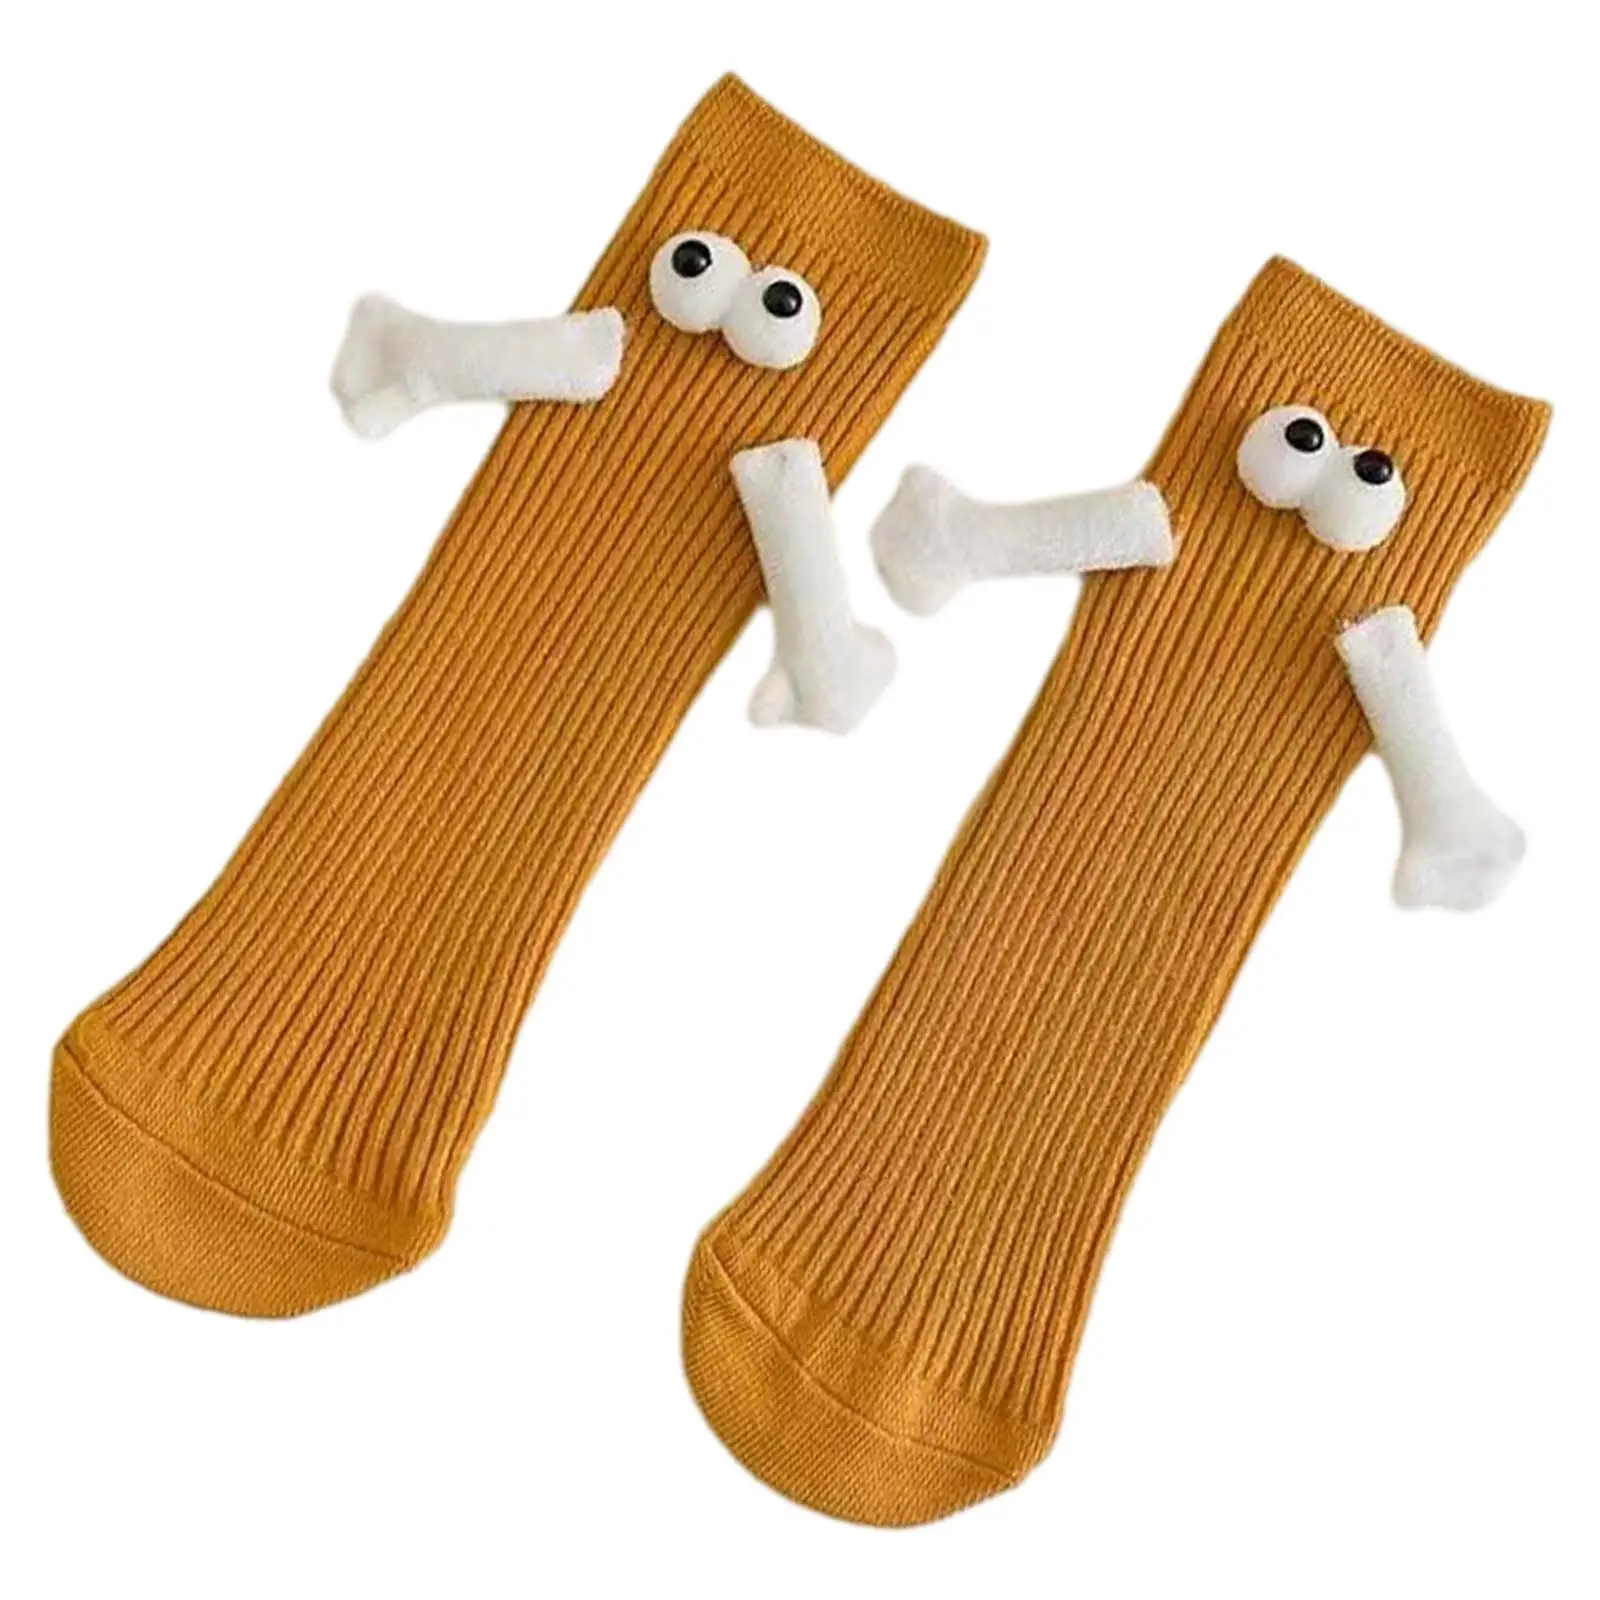 Funny Couple Holding Hands Sock Gifts Socks Soft 1 Pair 3D Doll Eyes Couple Socks Mid Tube Cute Couple Socks for Sisters Friends